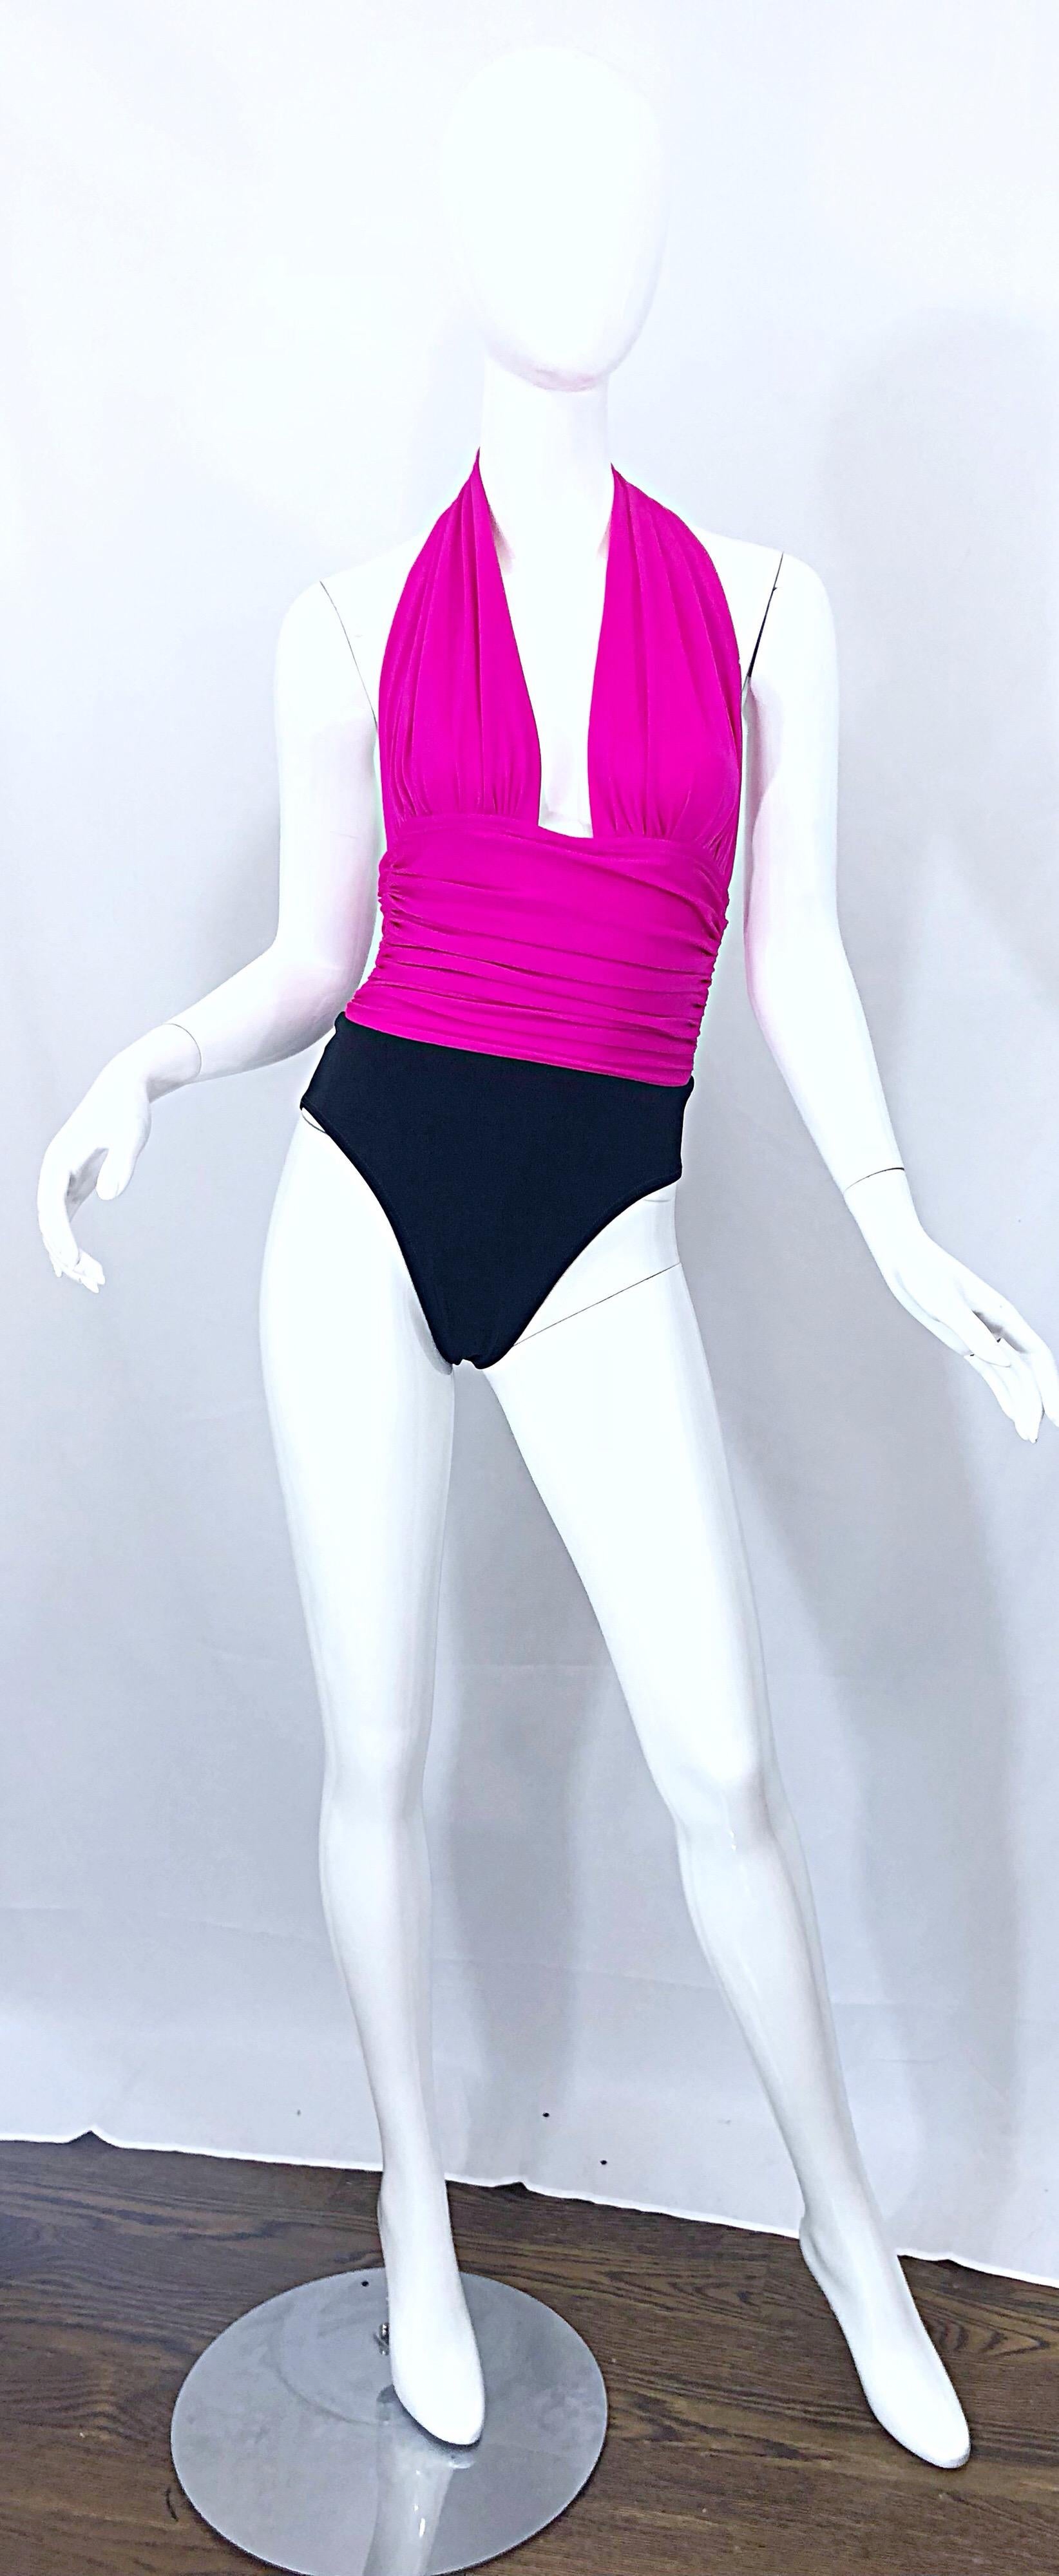 Yves Saint Laurent Size 12 / 14 Vintage Sexy Hot Pink + Black One Piece Swimsuit For Sale 5